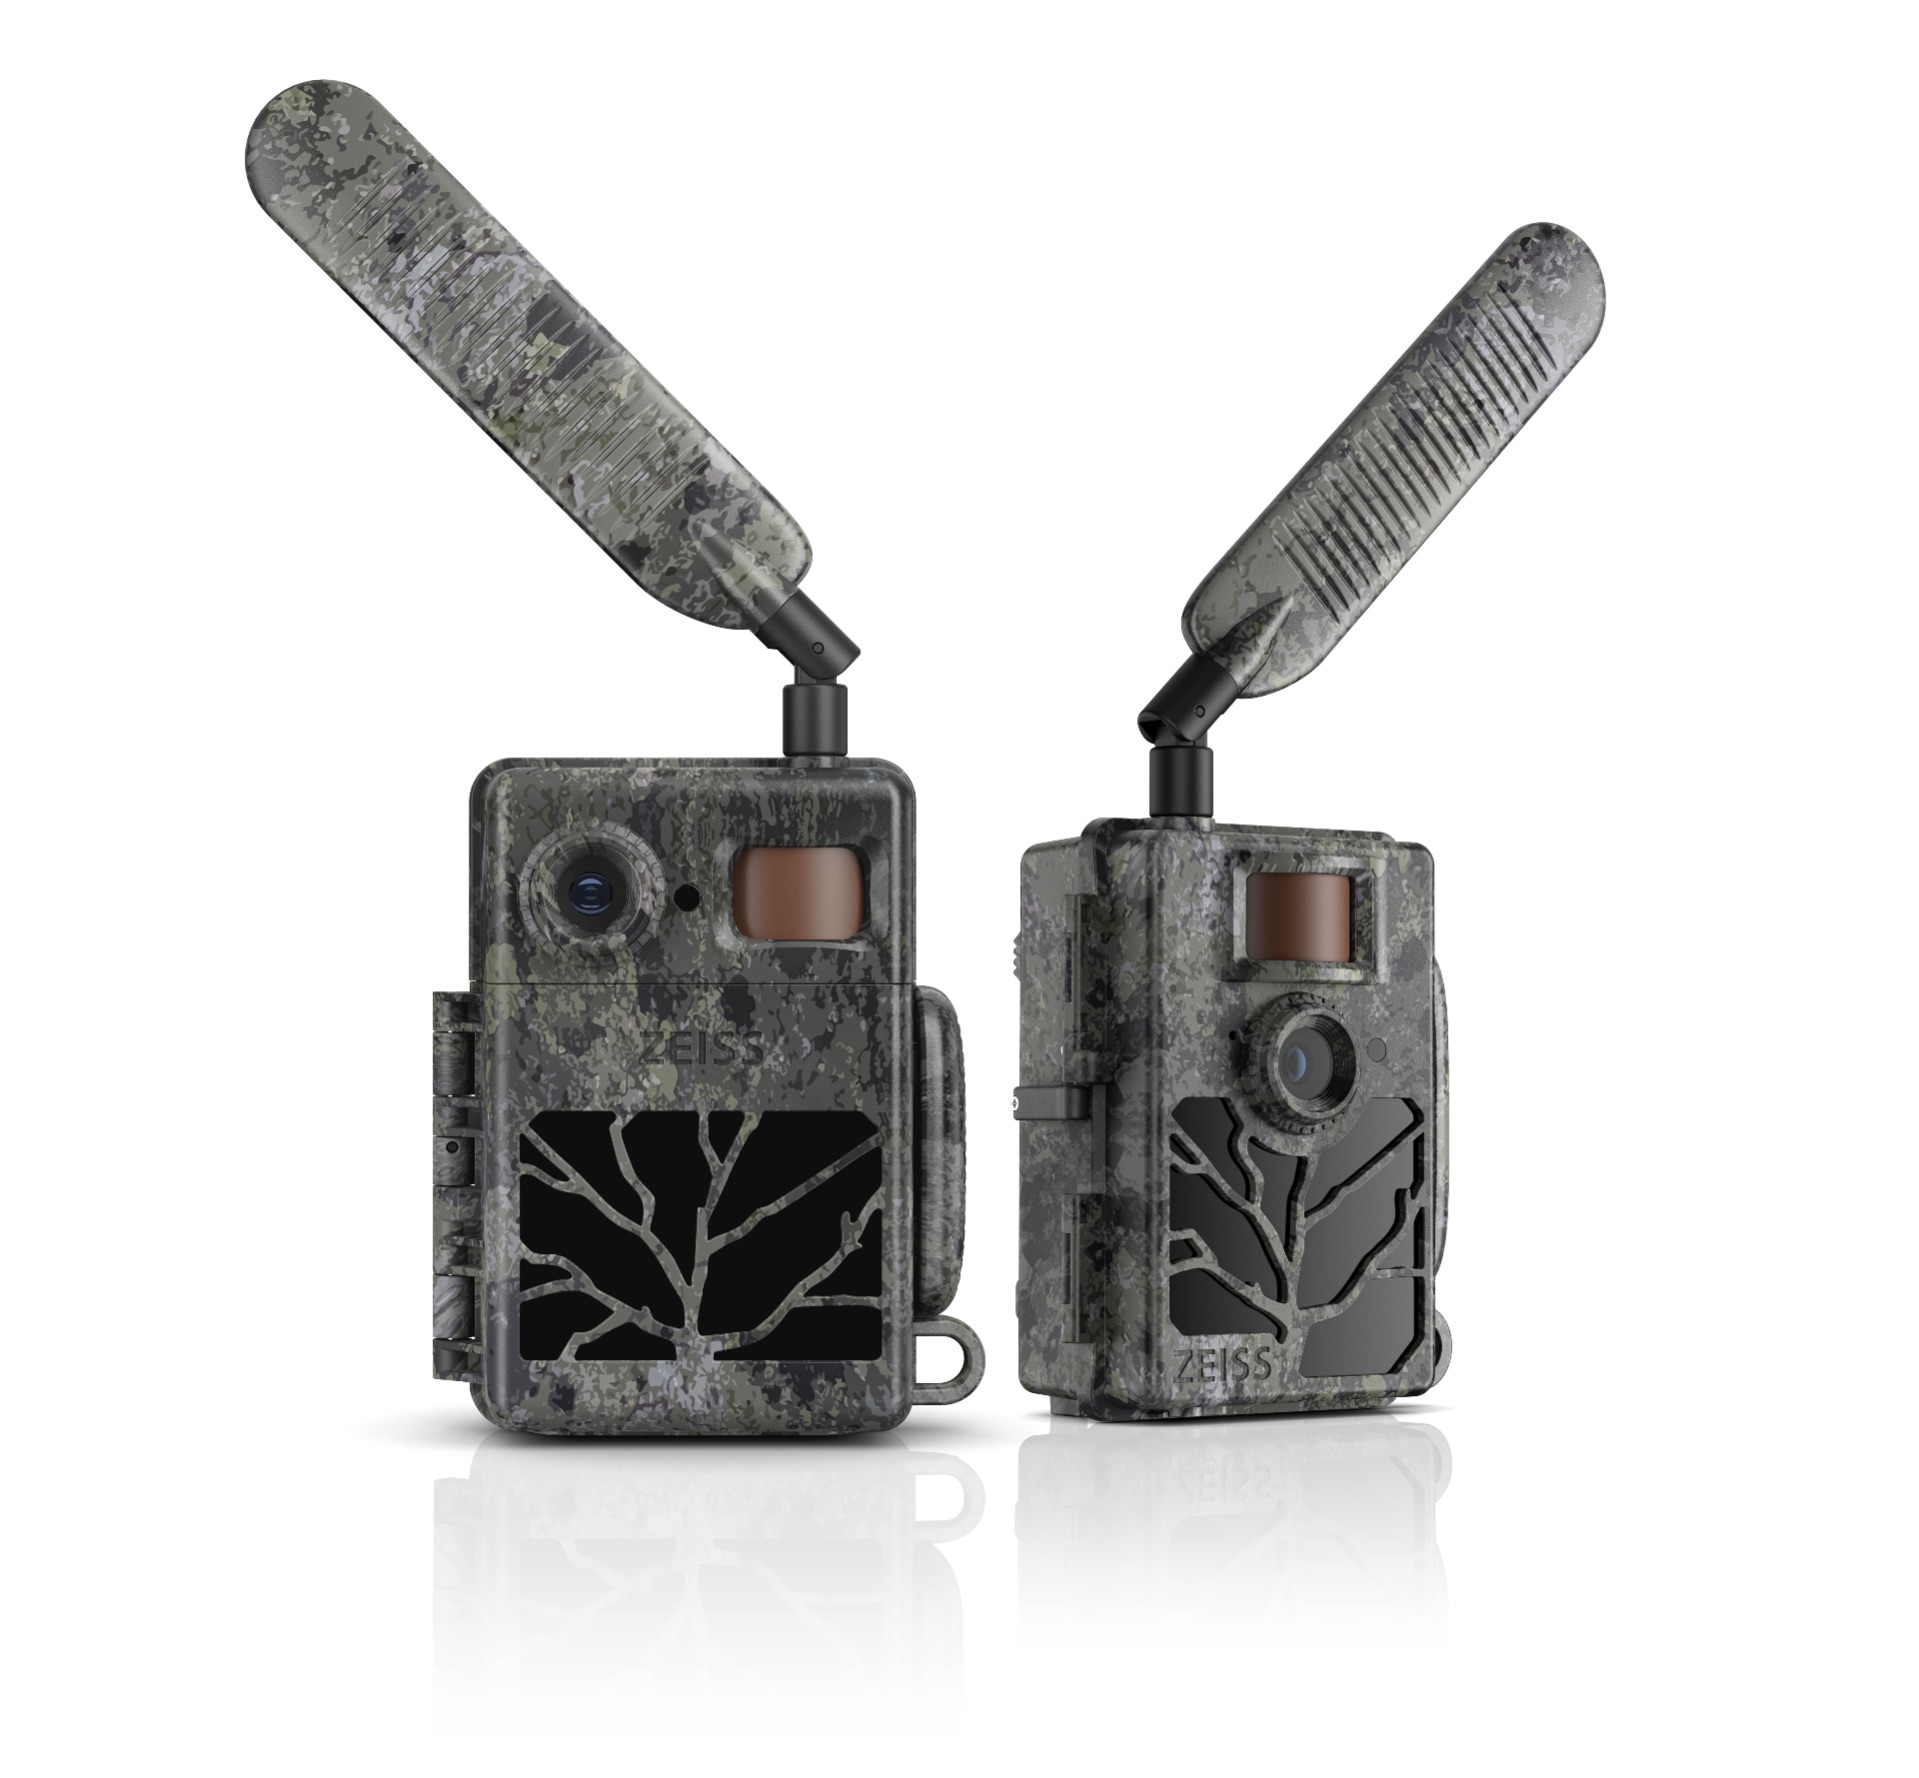 Zeiss Trail Camera